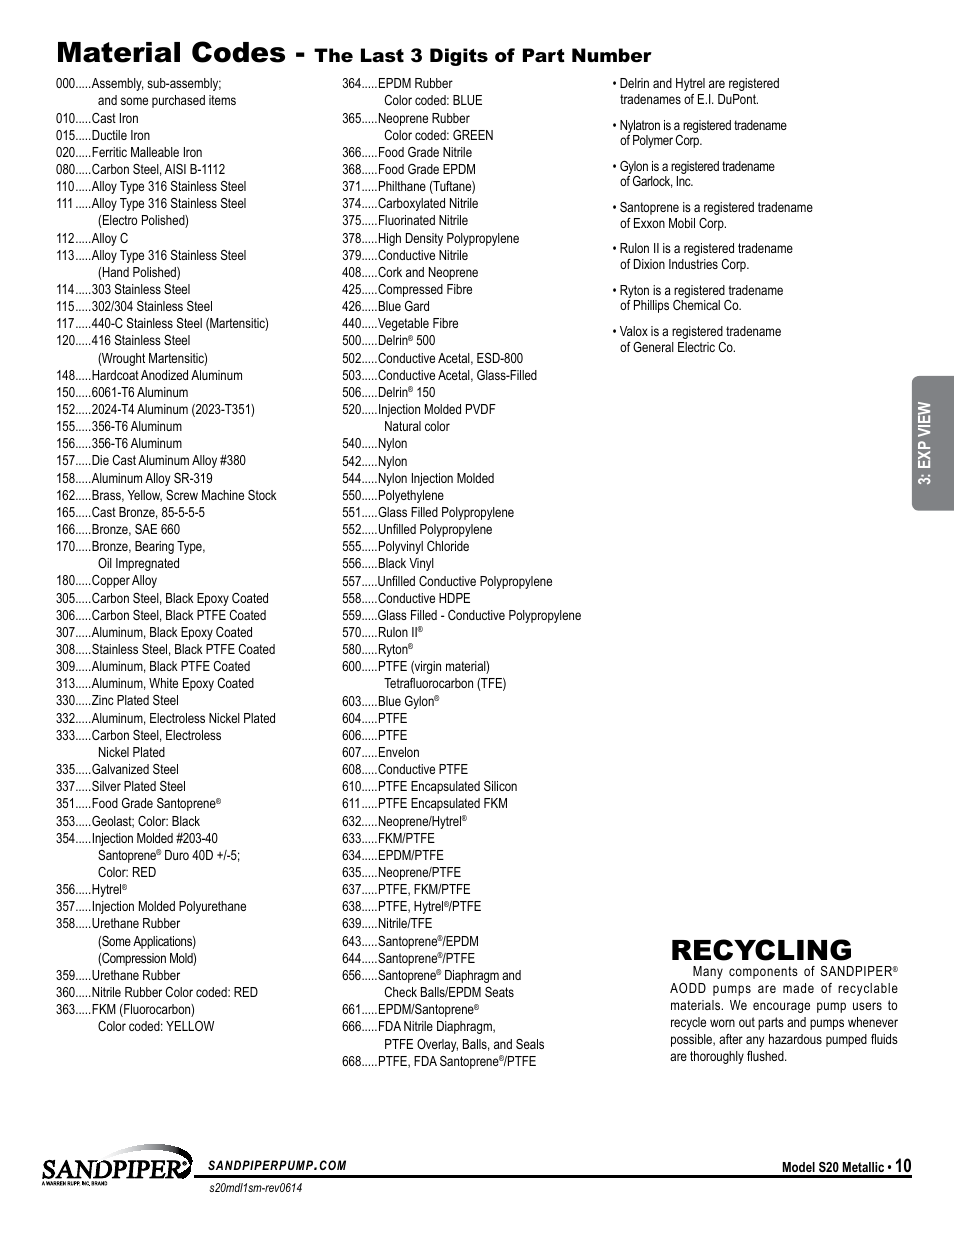 Material codes, Recycling, The last 3 digits of part number | SANDPIPER